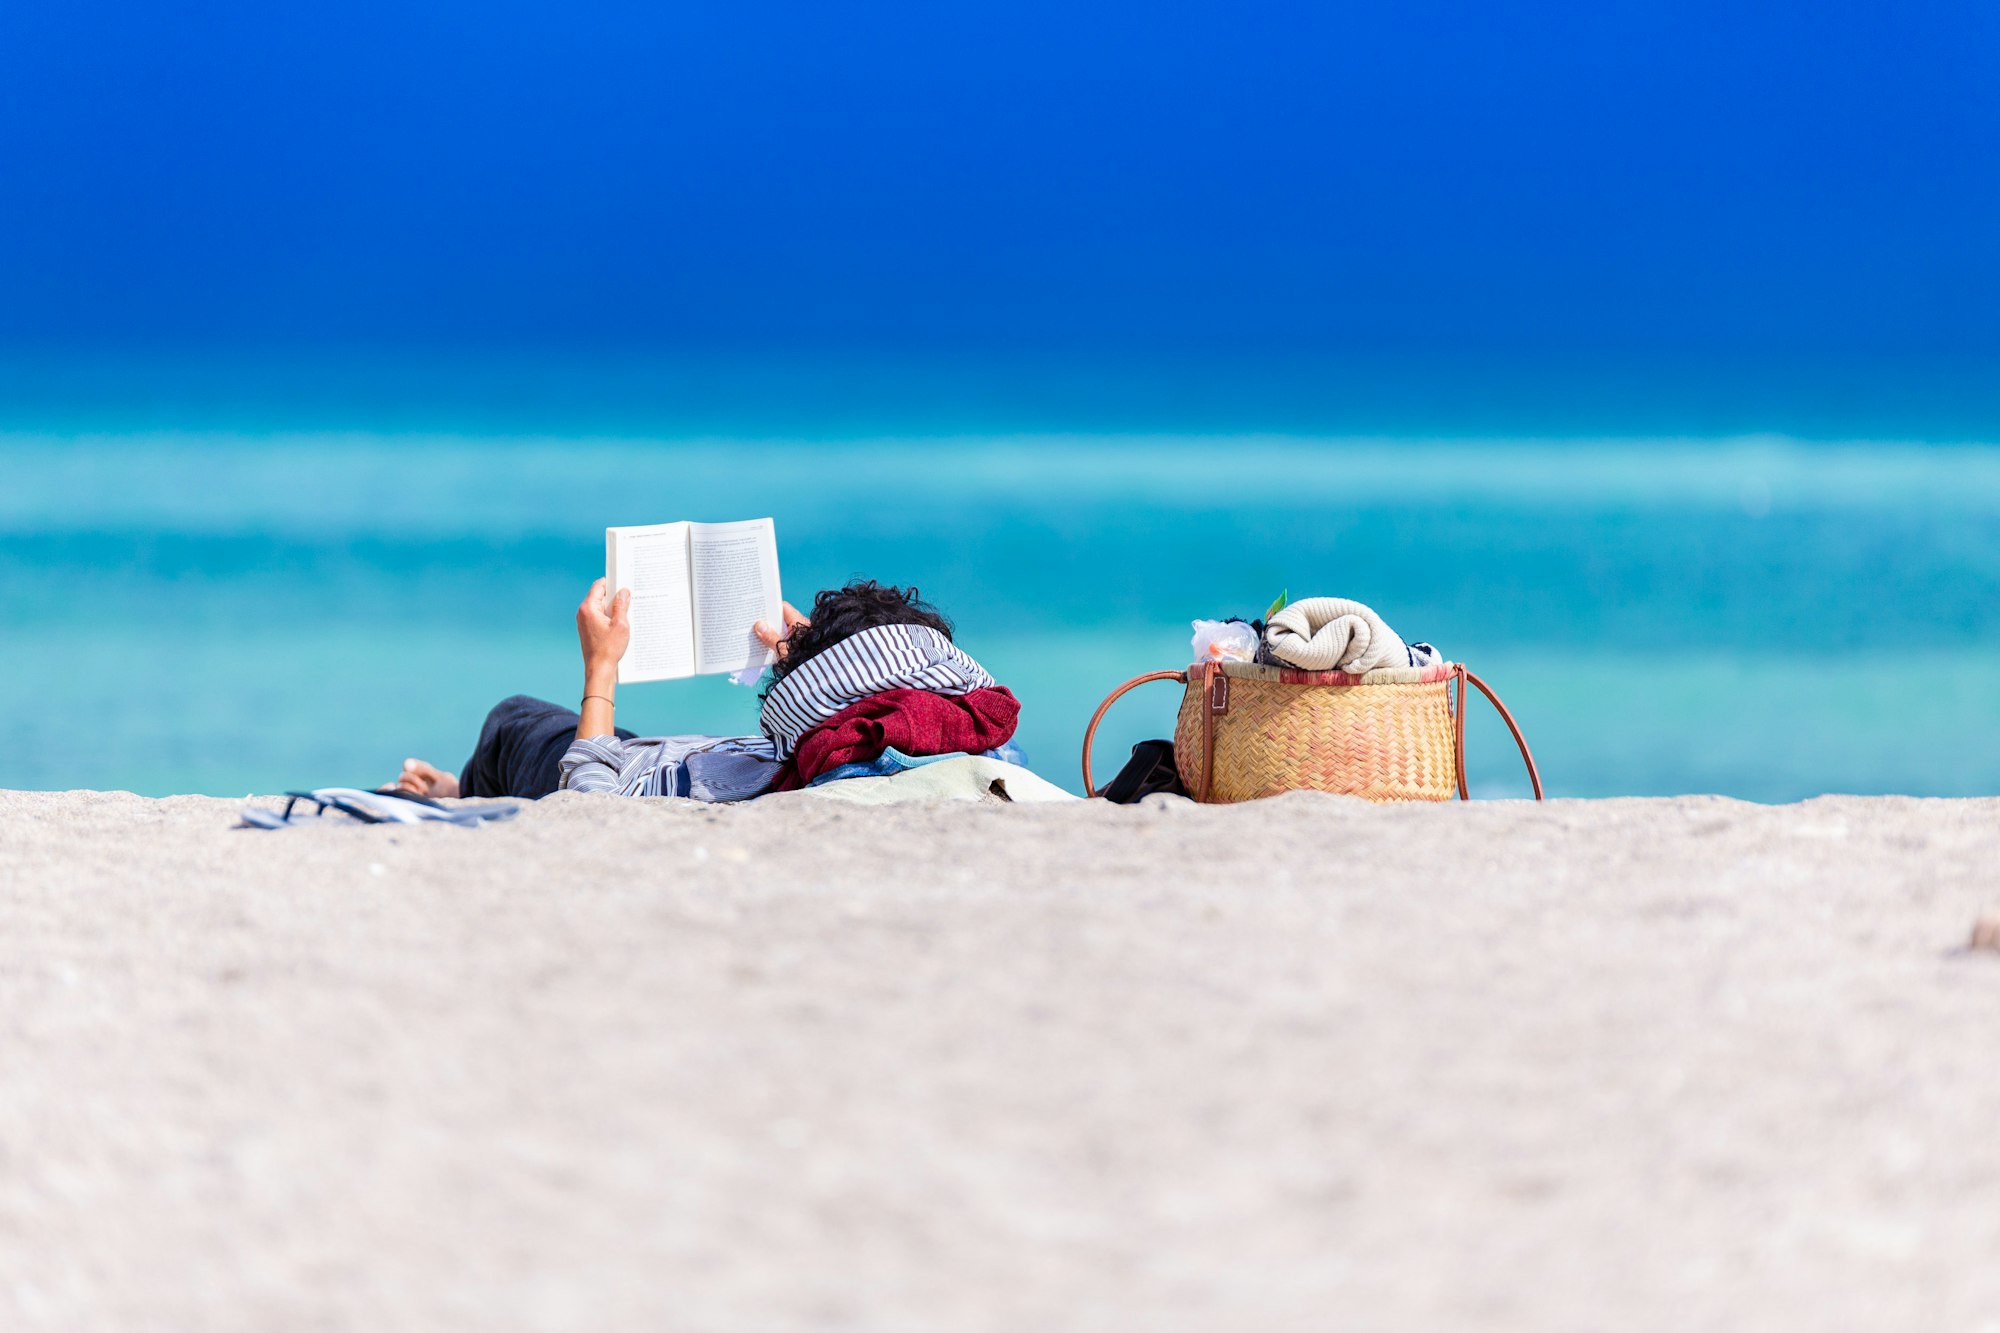 A calm scene featuring a person reading a book on the beach.